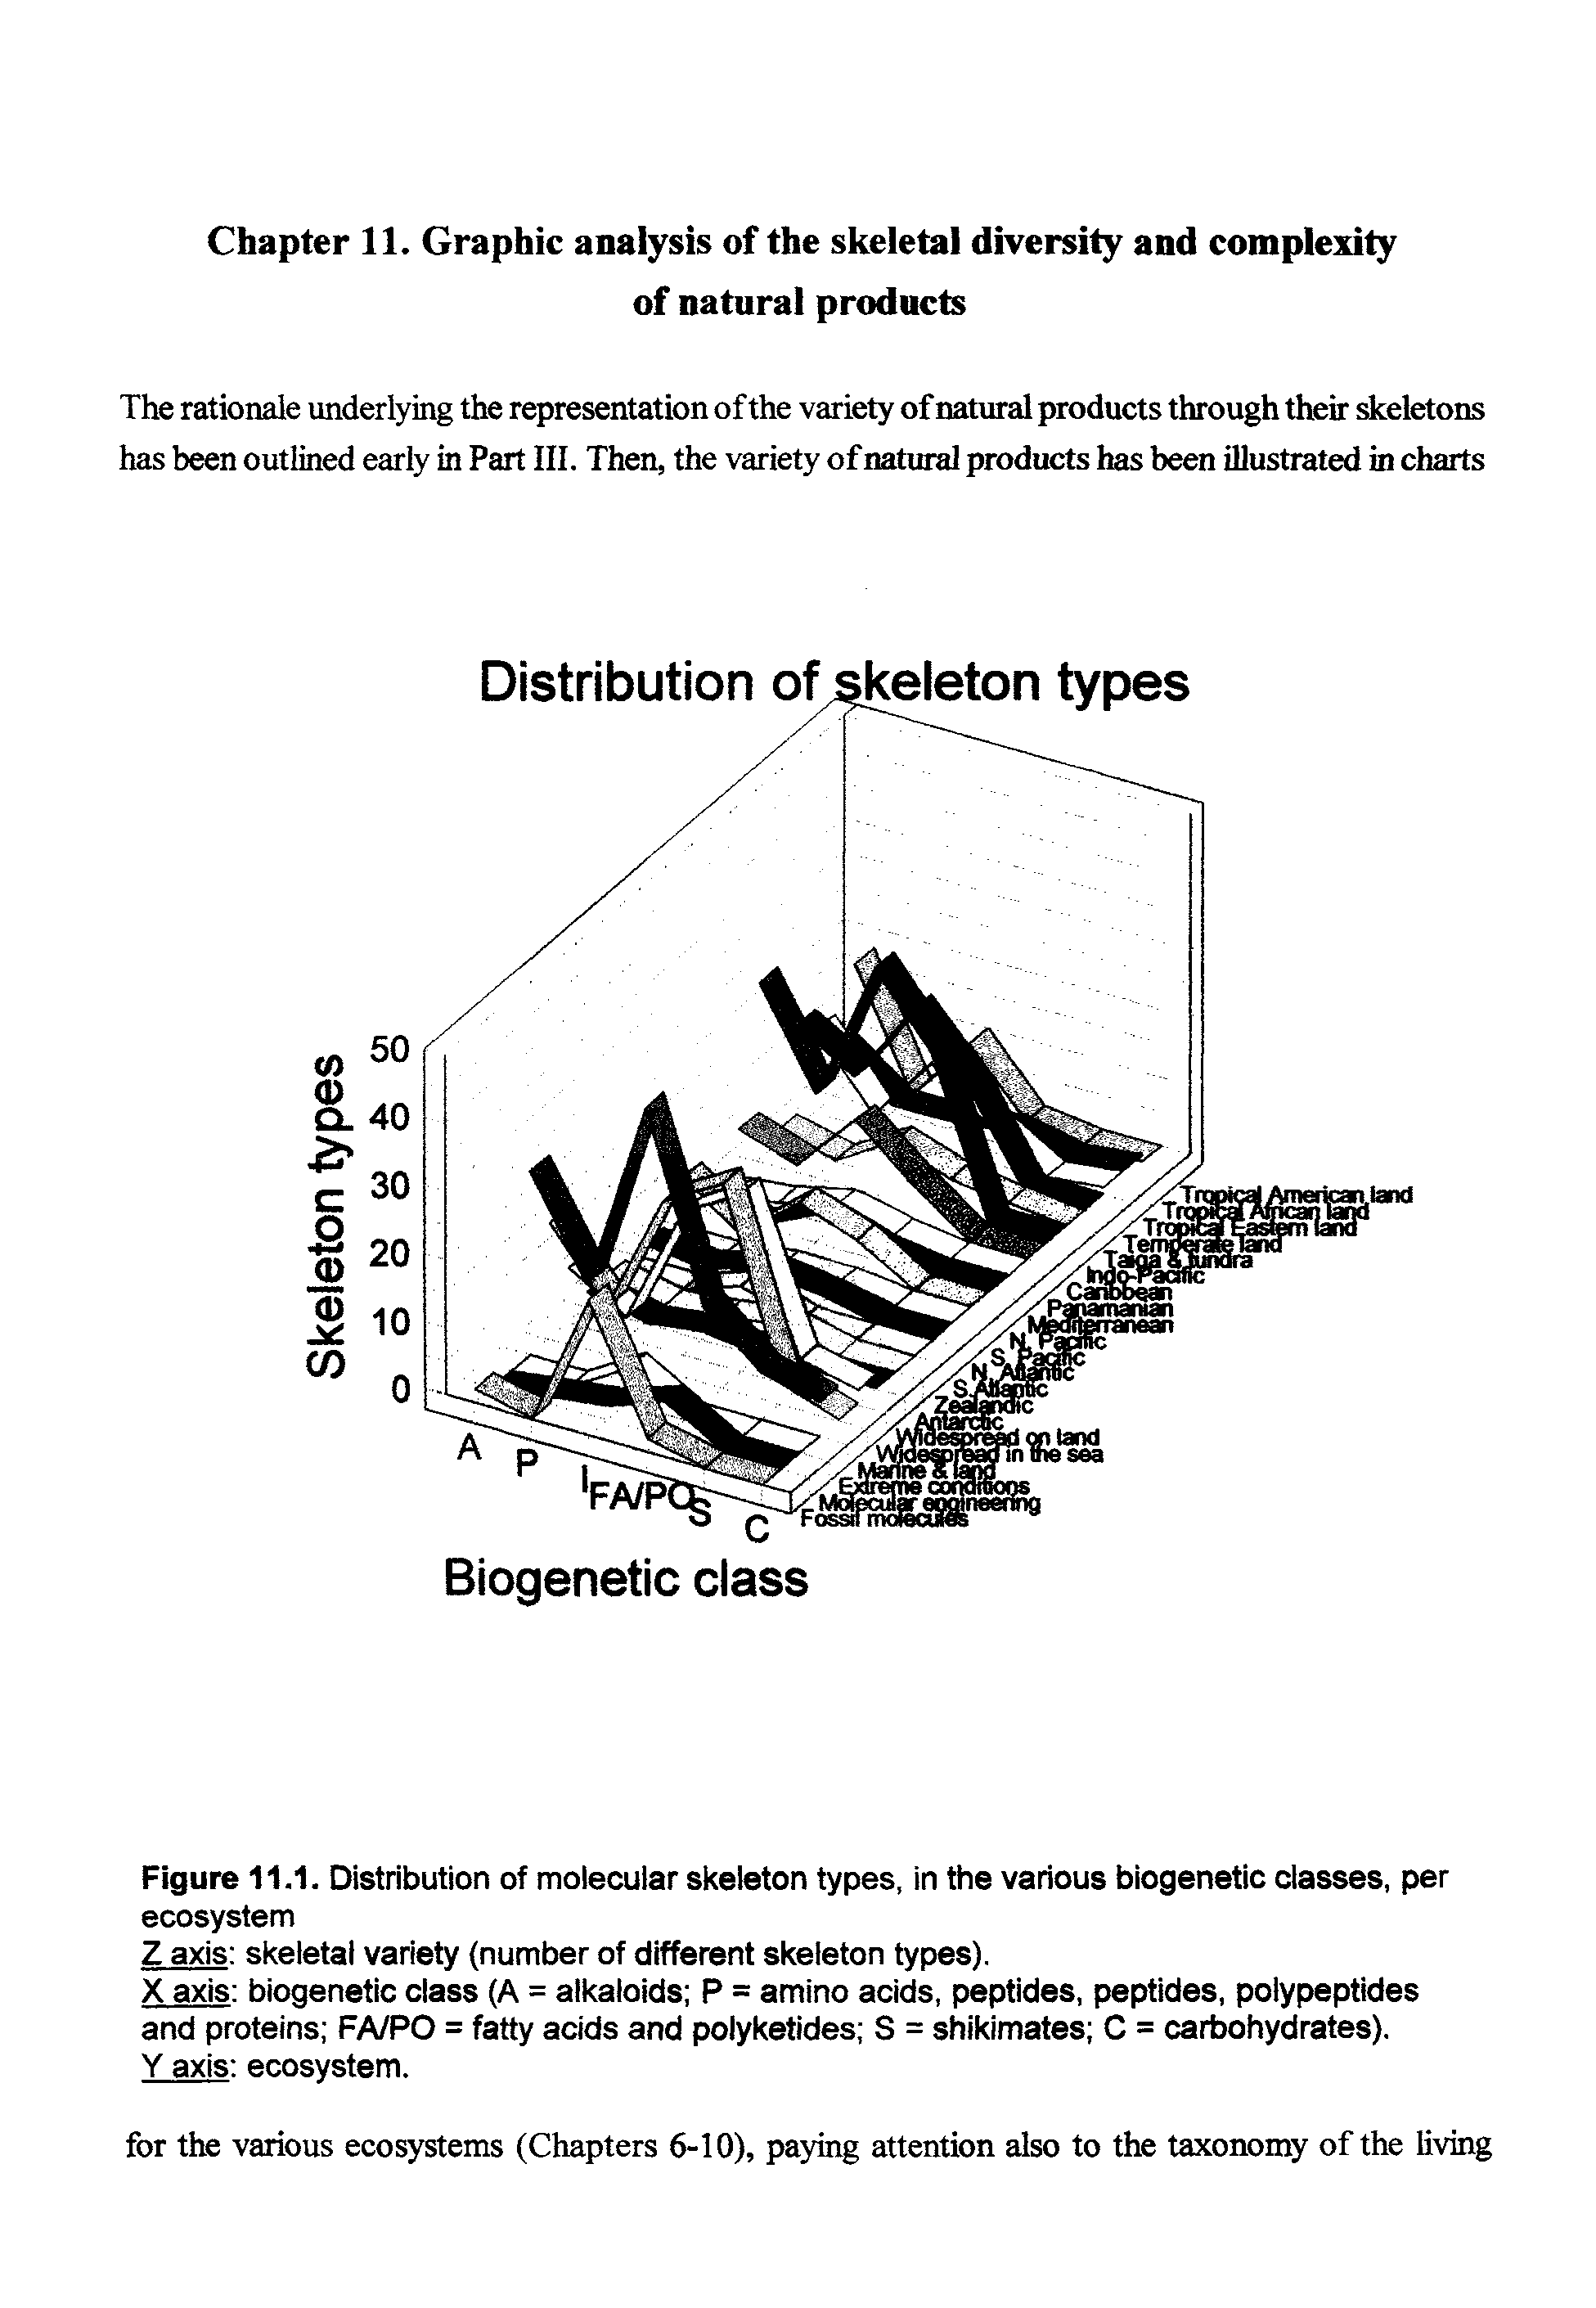 Figure 11.1. Distribution of molecuiar skeleton types, in the various biogenetic classes, per ecosystem...